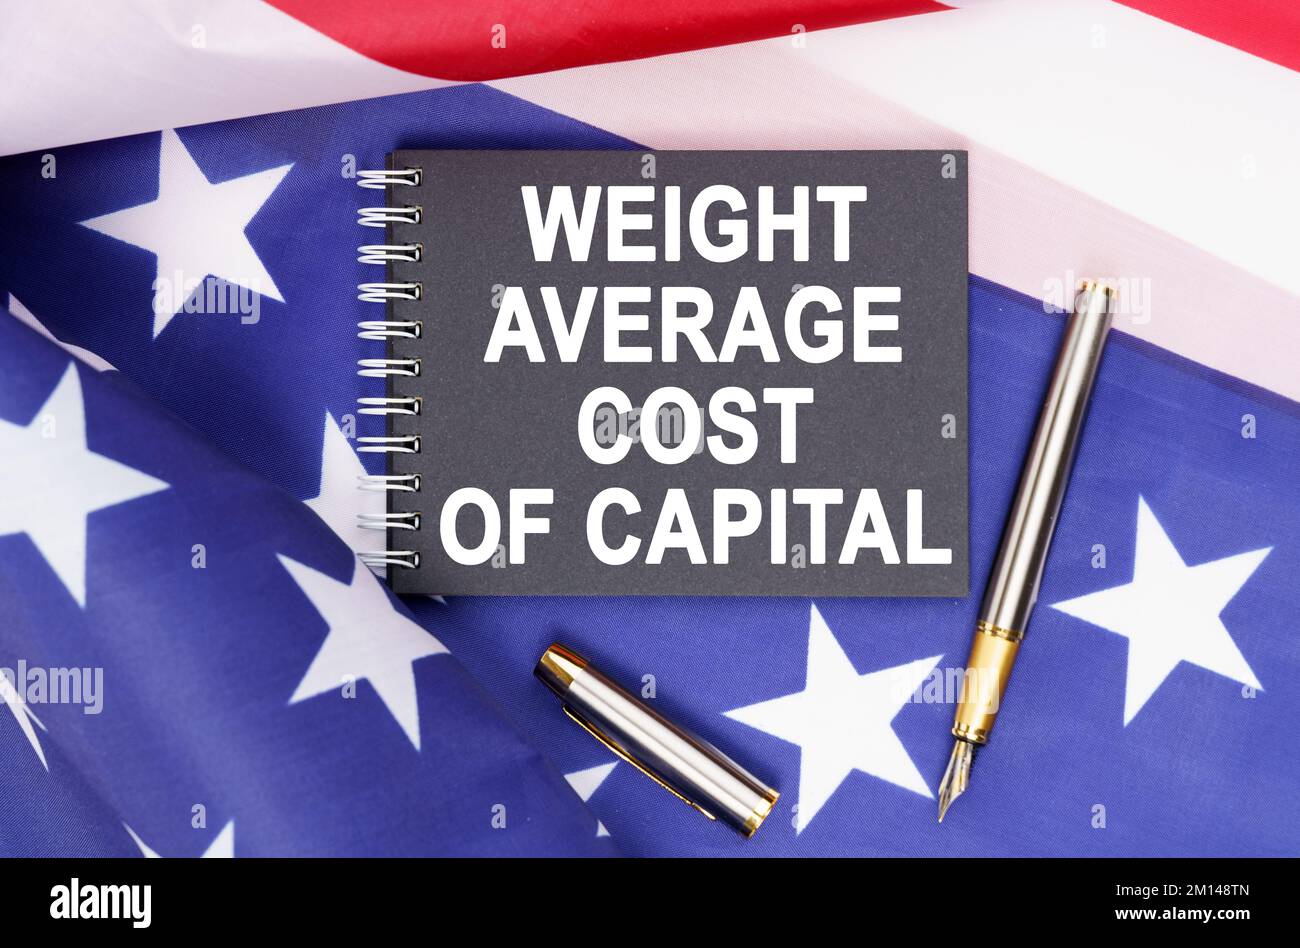 Business and finance concept. On the table is an American flag, a pen and a notebook with the inscription - WEIGHT AVERAGE COST OF CAPITAL Stock Photo